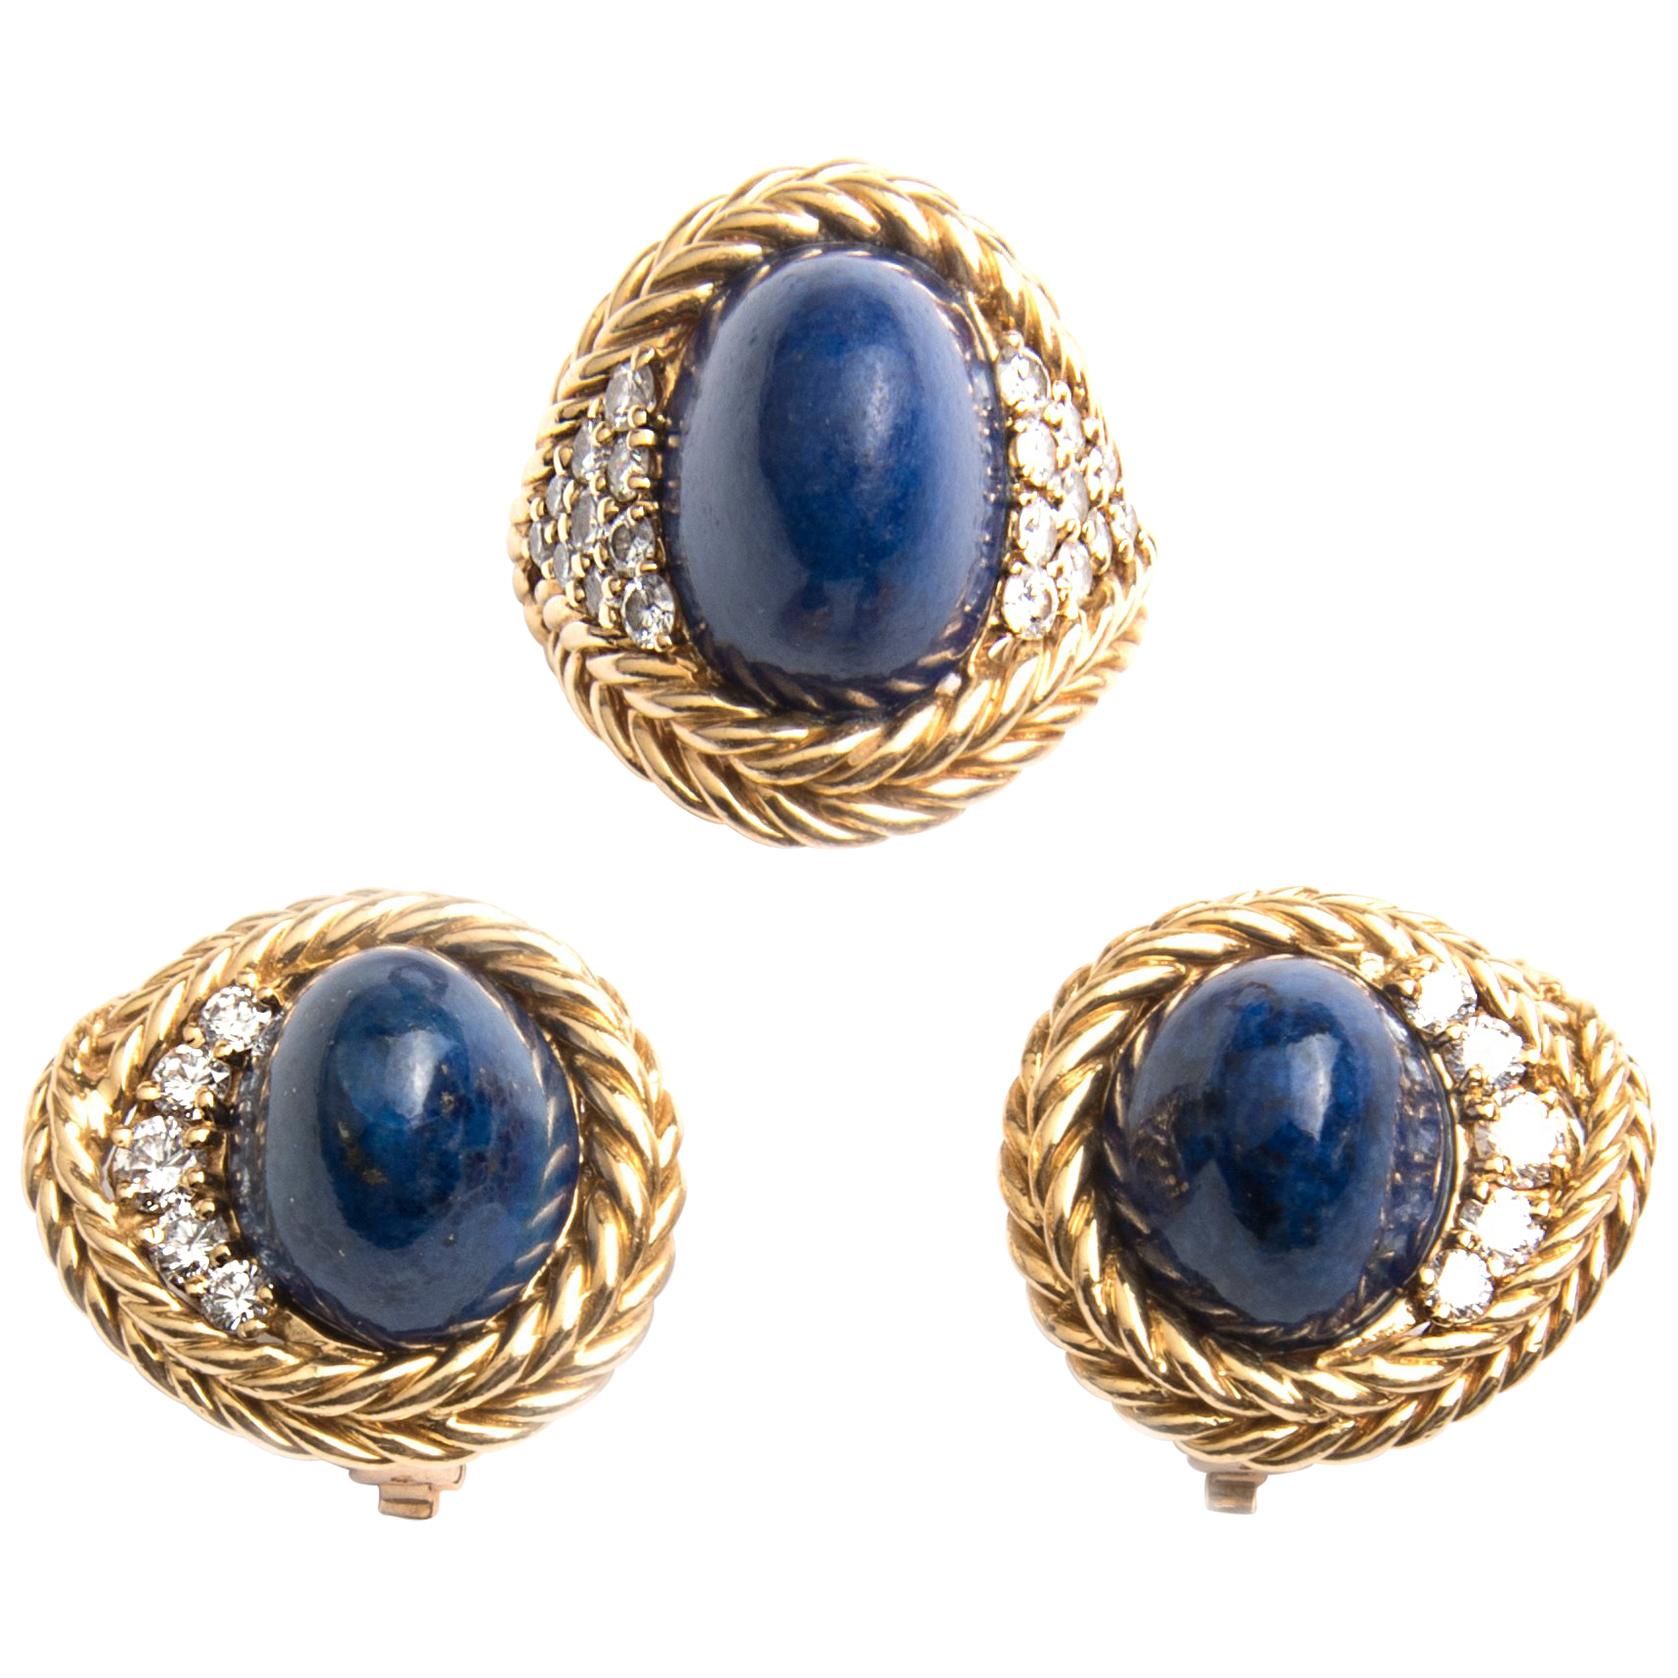 Boucheron 18k Yellow Gold Diamond and Lapis Lazuli Ring and Earrings Set For Sale